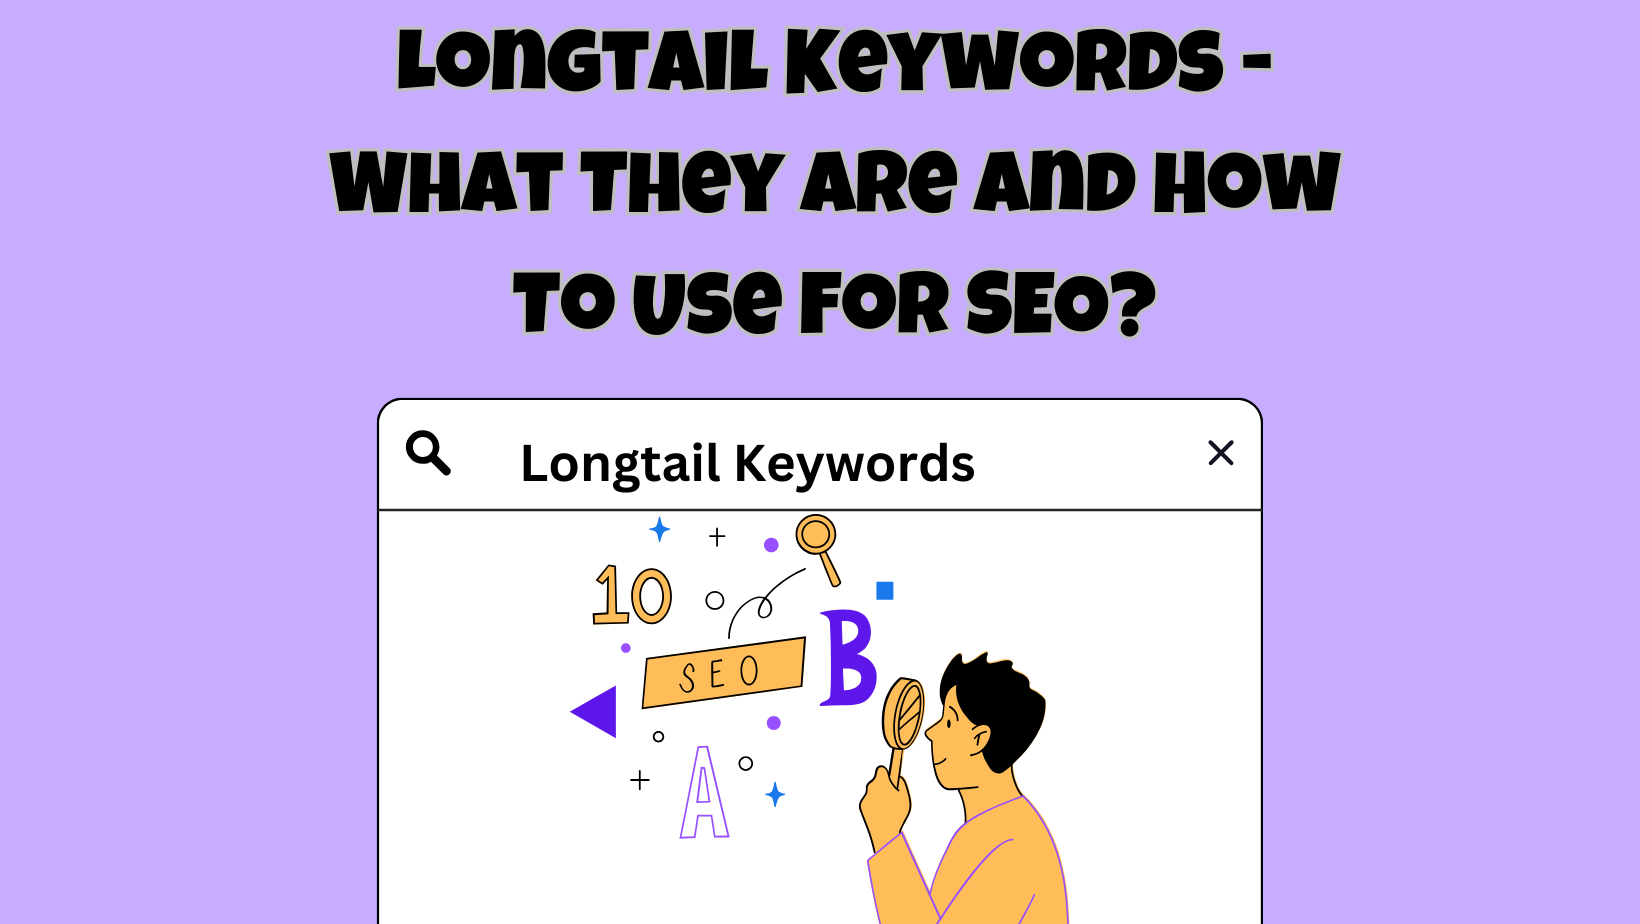 Longtail Keywords - What They Are And How To Use For SEO